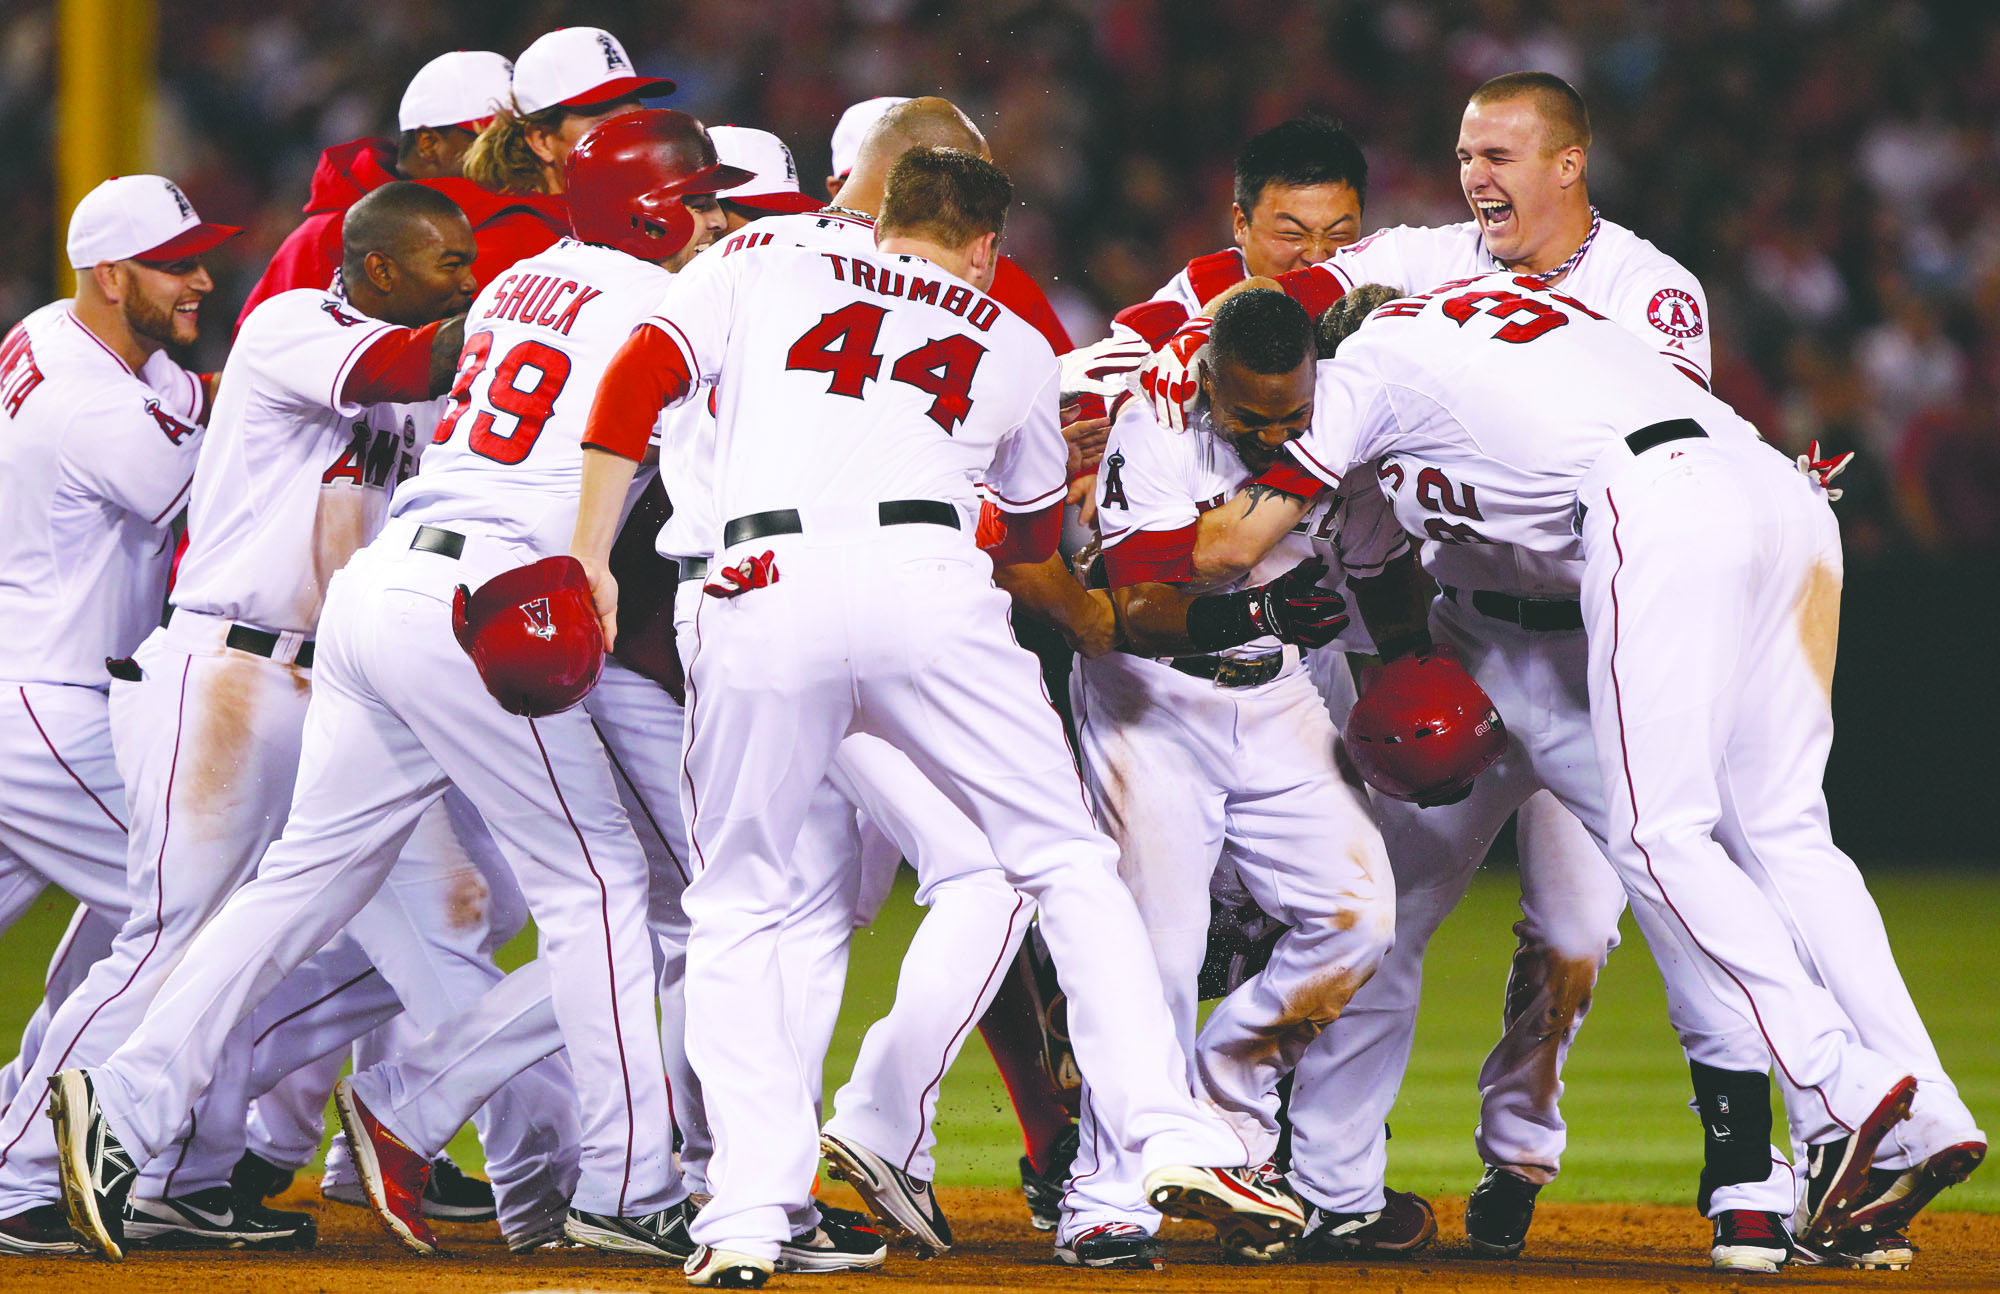 Associated Press Los Angeles Angels' Erick Aybar, center, is mobbed by teammates after hitting the game-winning single against the St. Louis Cardinals in the ninth inning Thursday in Anaheim, Calif. The Angels won the game 6-5.